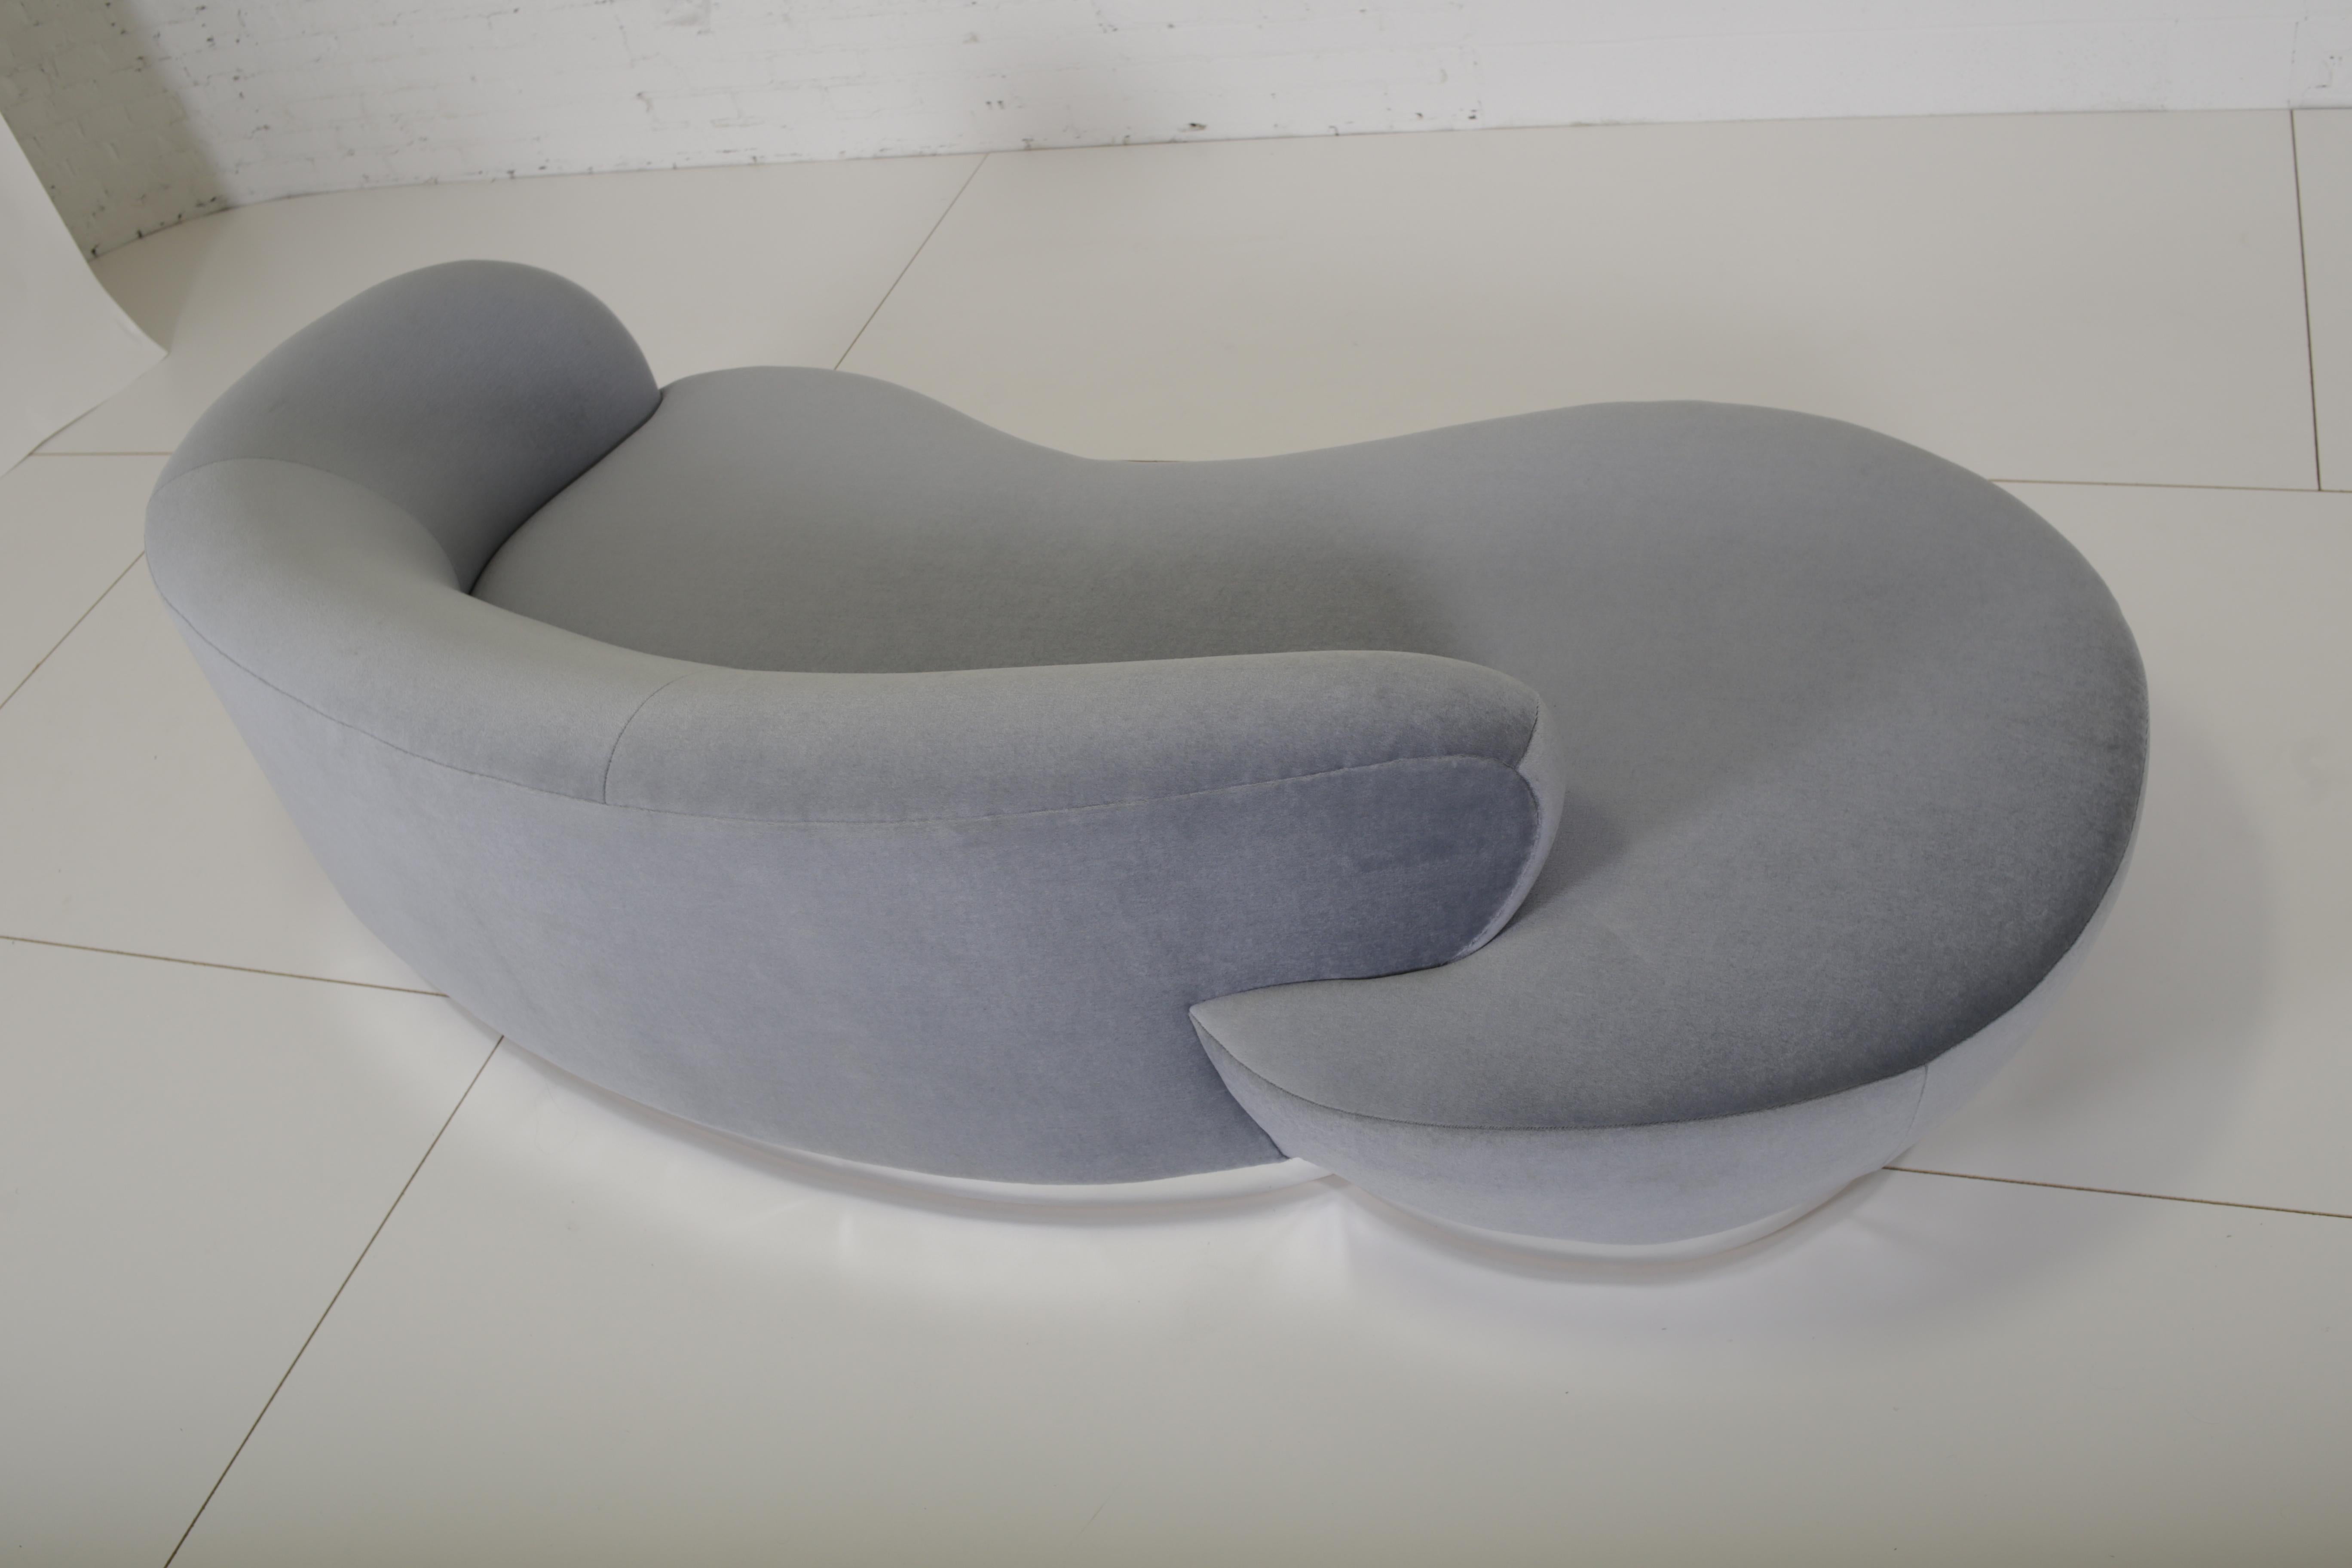  Directional Cloud Sofa on Chrome Base In Excellent Condition For Sale In Chicago, IL